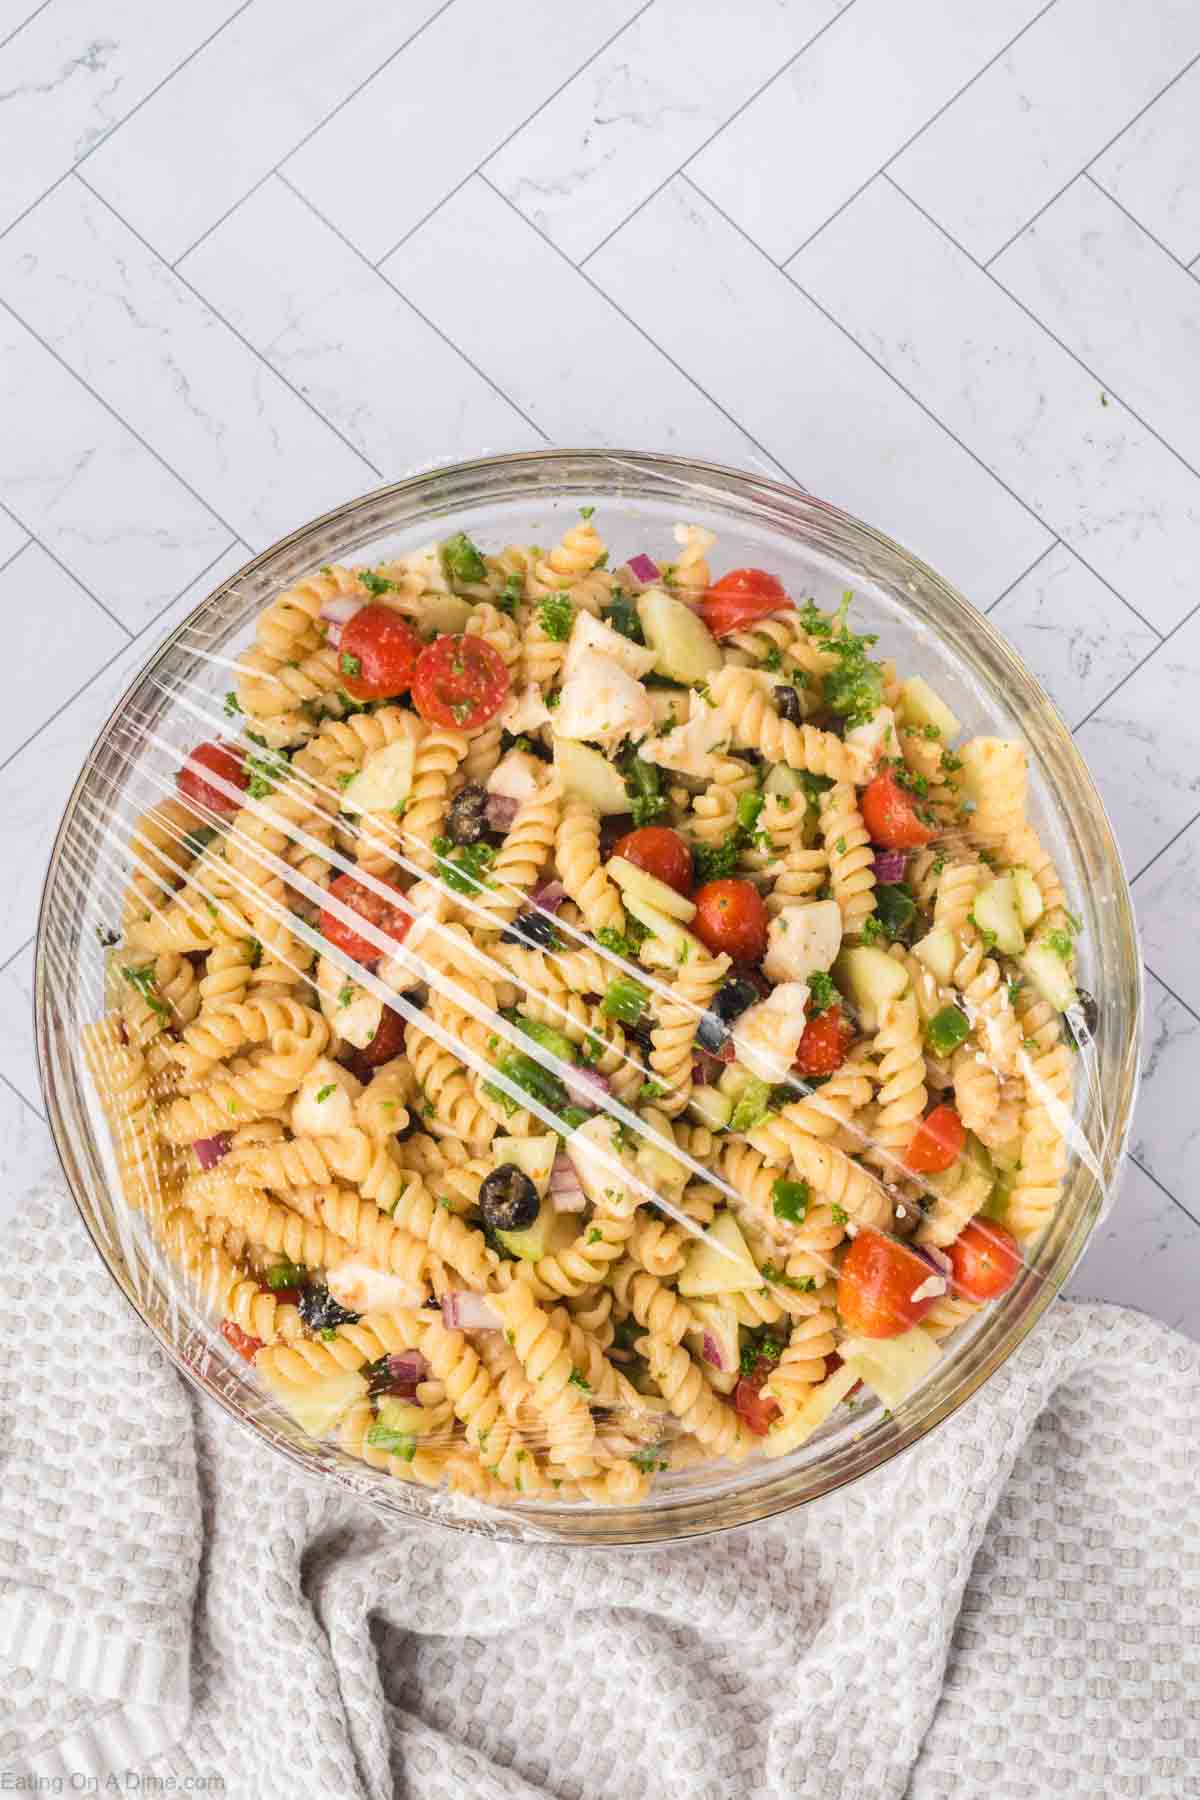 Pasta salad covered with plastic wrap in a bowl